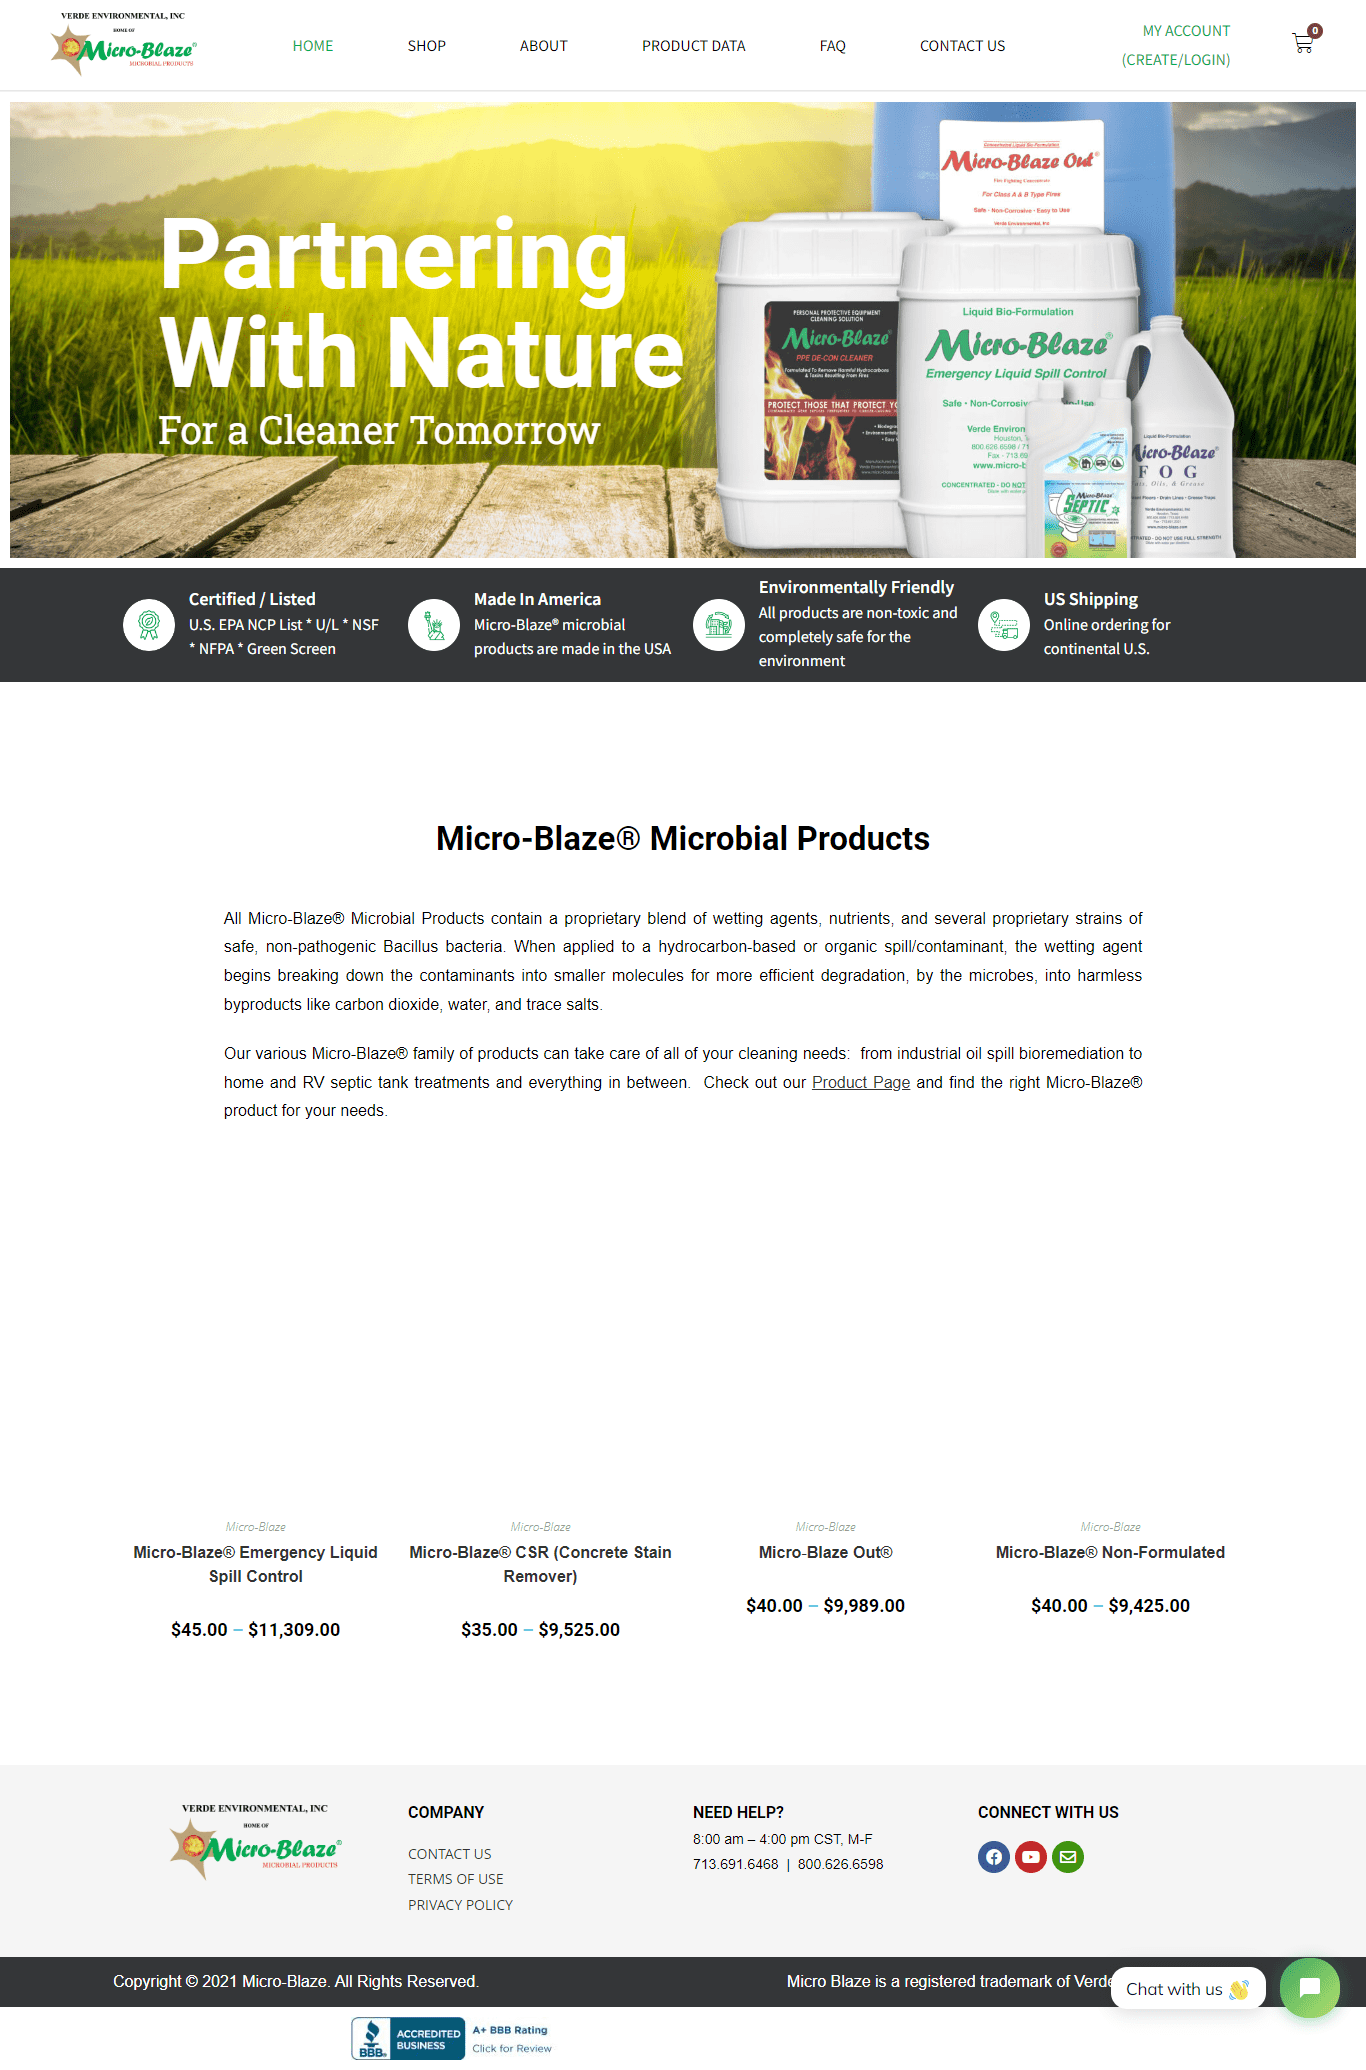 Website design for a natural products company: showcasing eco-friendly products and nature-inspired aesthetics.